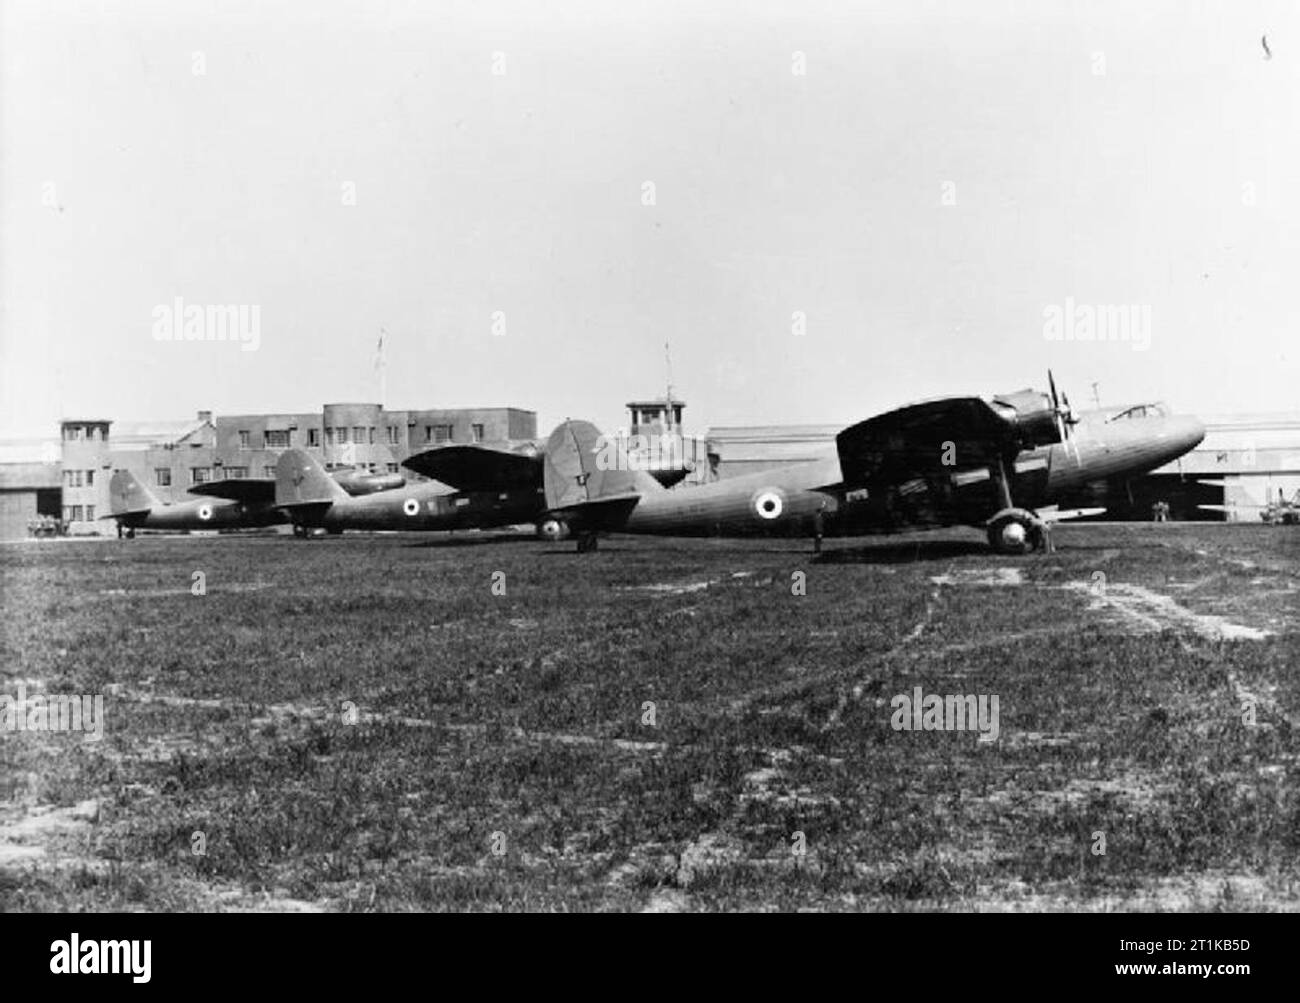 Royal Air Force Training Command, 1939-1940. Fokker F.XXXVI, G-AFZR, and Fokker F.XXIIs, G-AFZP and G-AFXR, of No. 1 Air Observer and Navigation School, parked in front of the airport buildings at Prestwick, Ayrshire. G-AFZR (formerly PH-AJA) was purchased from the Dutch airline KLM by the RAF in 1939. It was flown and maintained by Scottish Aviation Ltd, Prestwick, under its civil registration, and served alongside the F.XXIIs as a navigational trainer, initially with No. 12 Elementary Flying Training School, followed by 1 AONS. On 21 May 1940, G-AFZR crashed on take off from Prestwick. Stock Photo